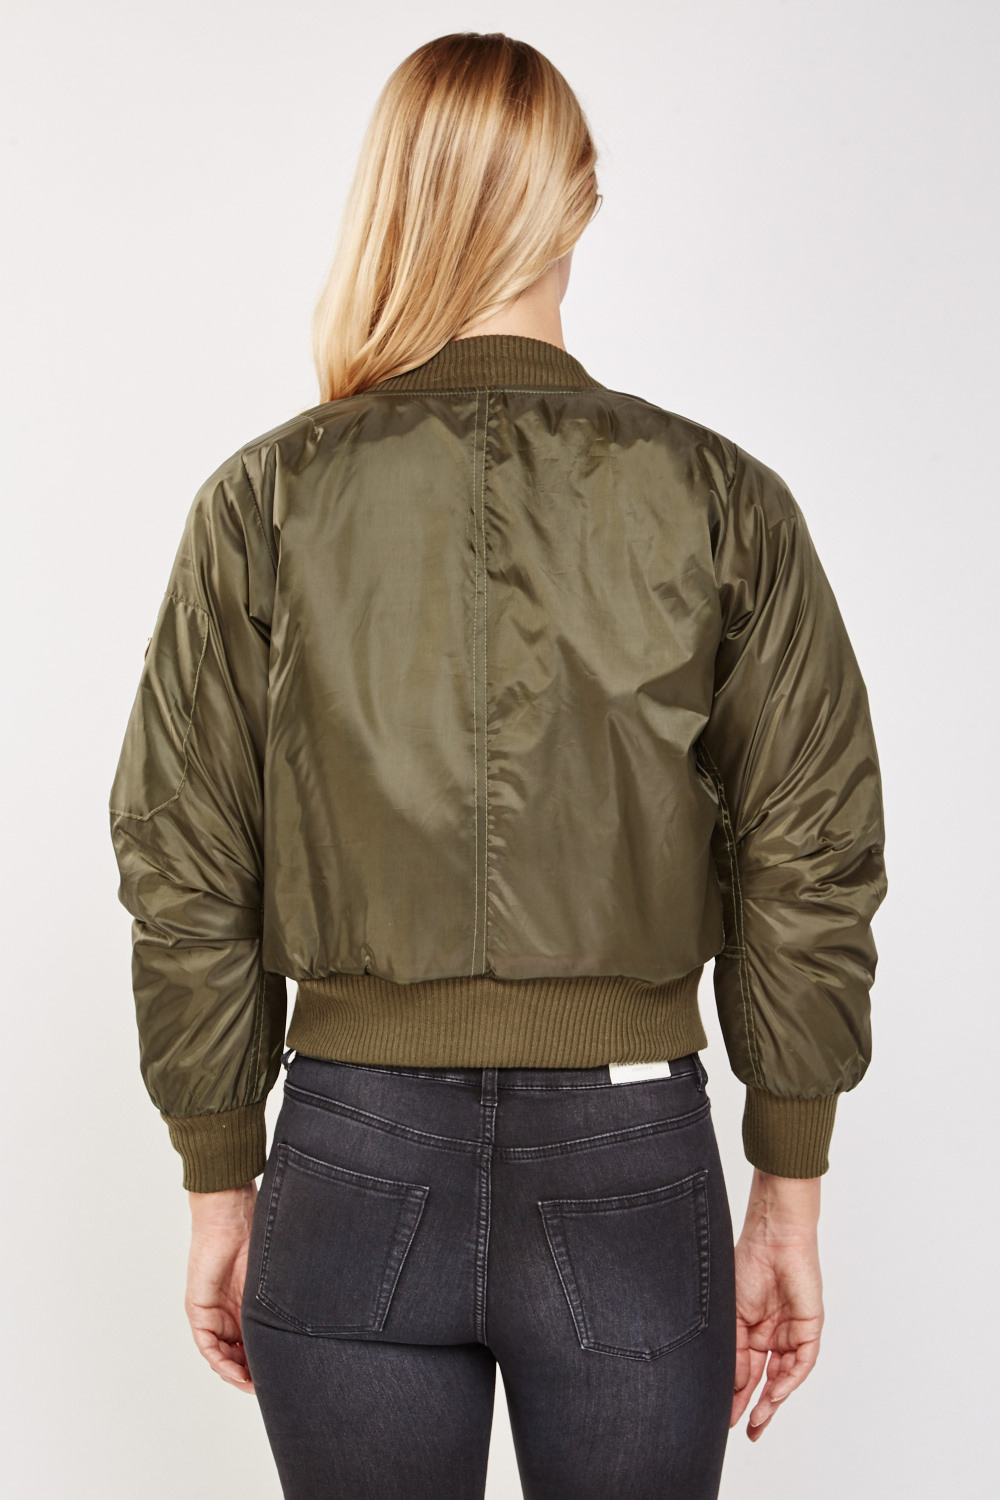 Zip Up Ruched Sleeve Bomber Jacket - Just $7